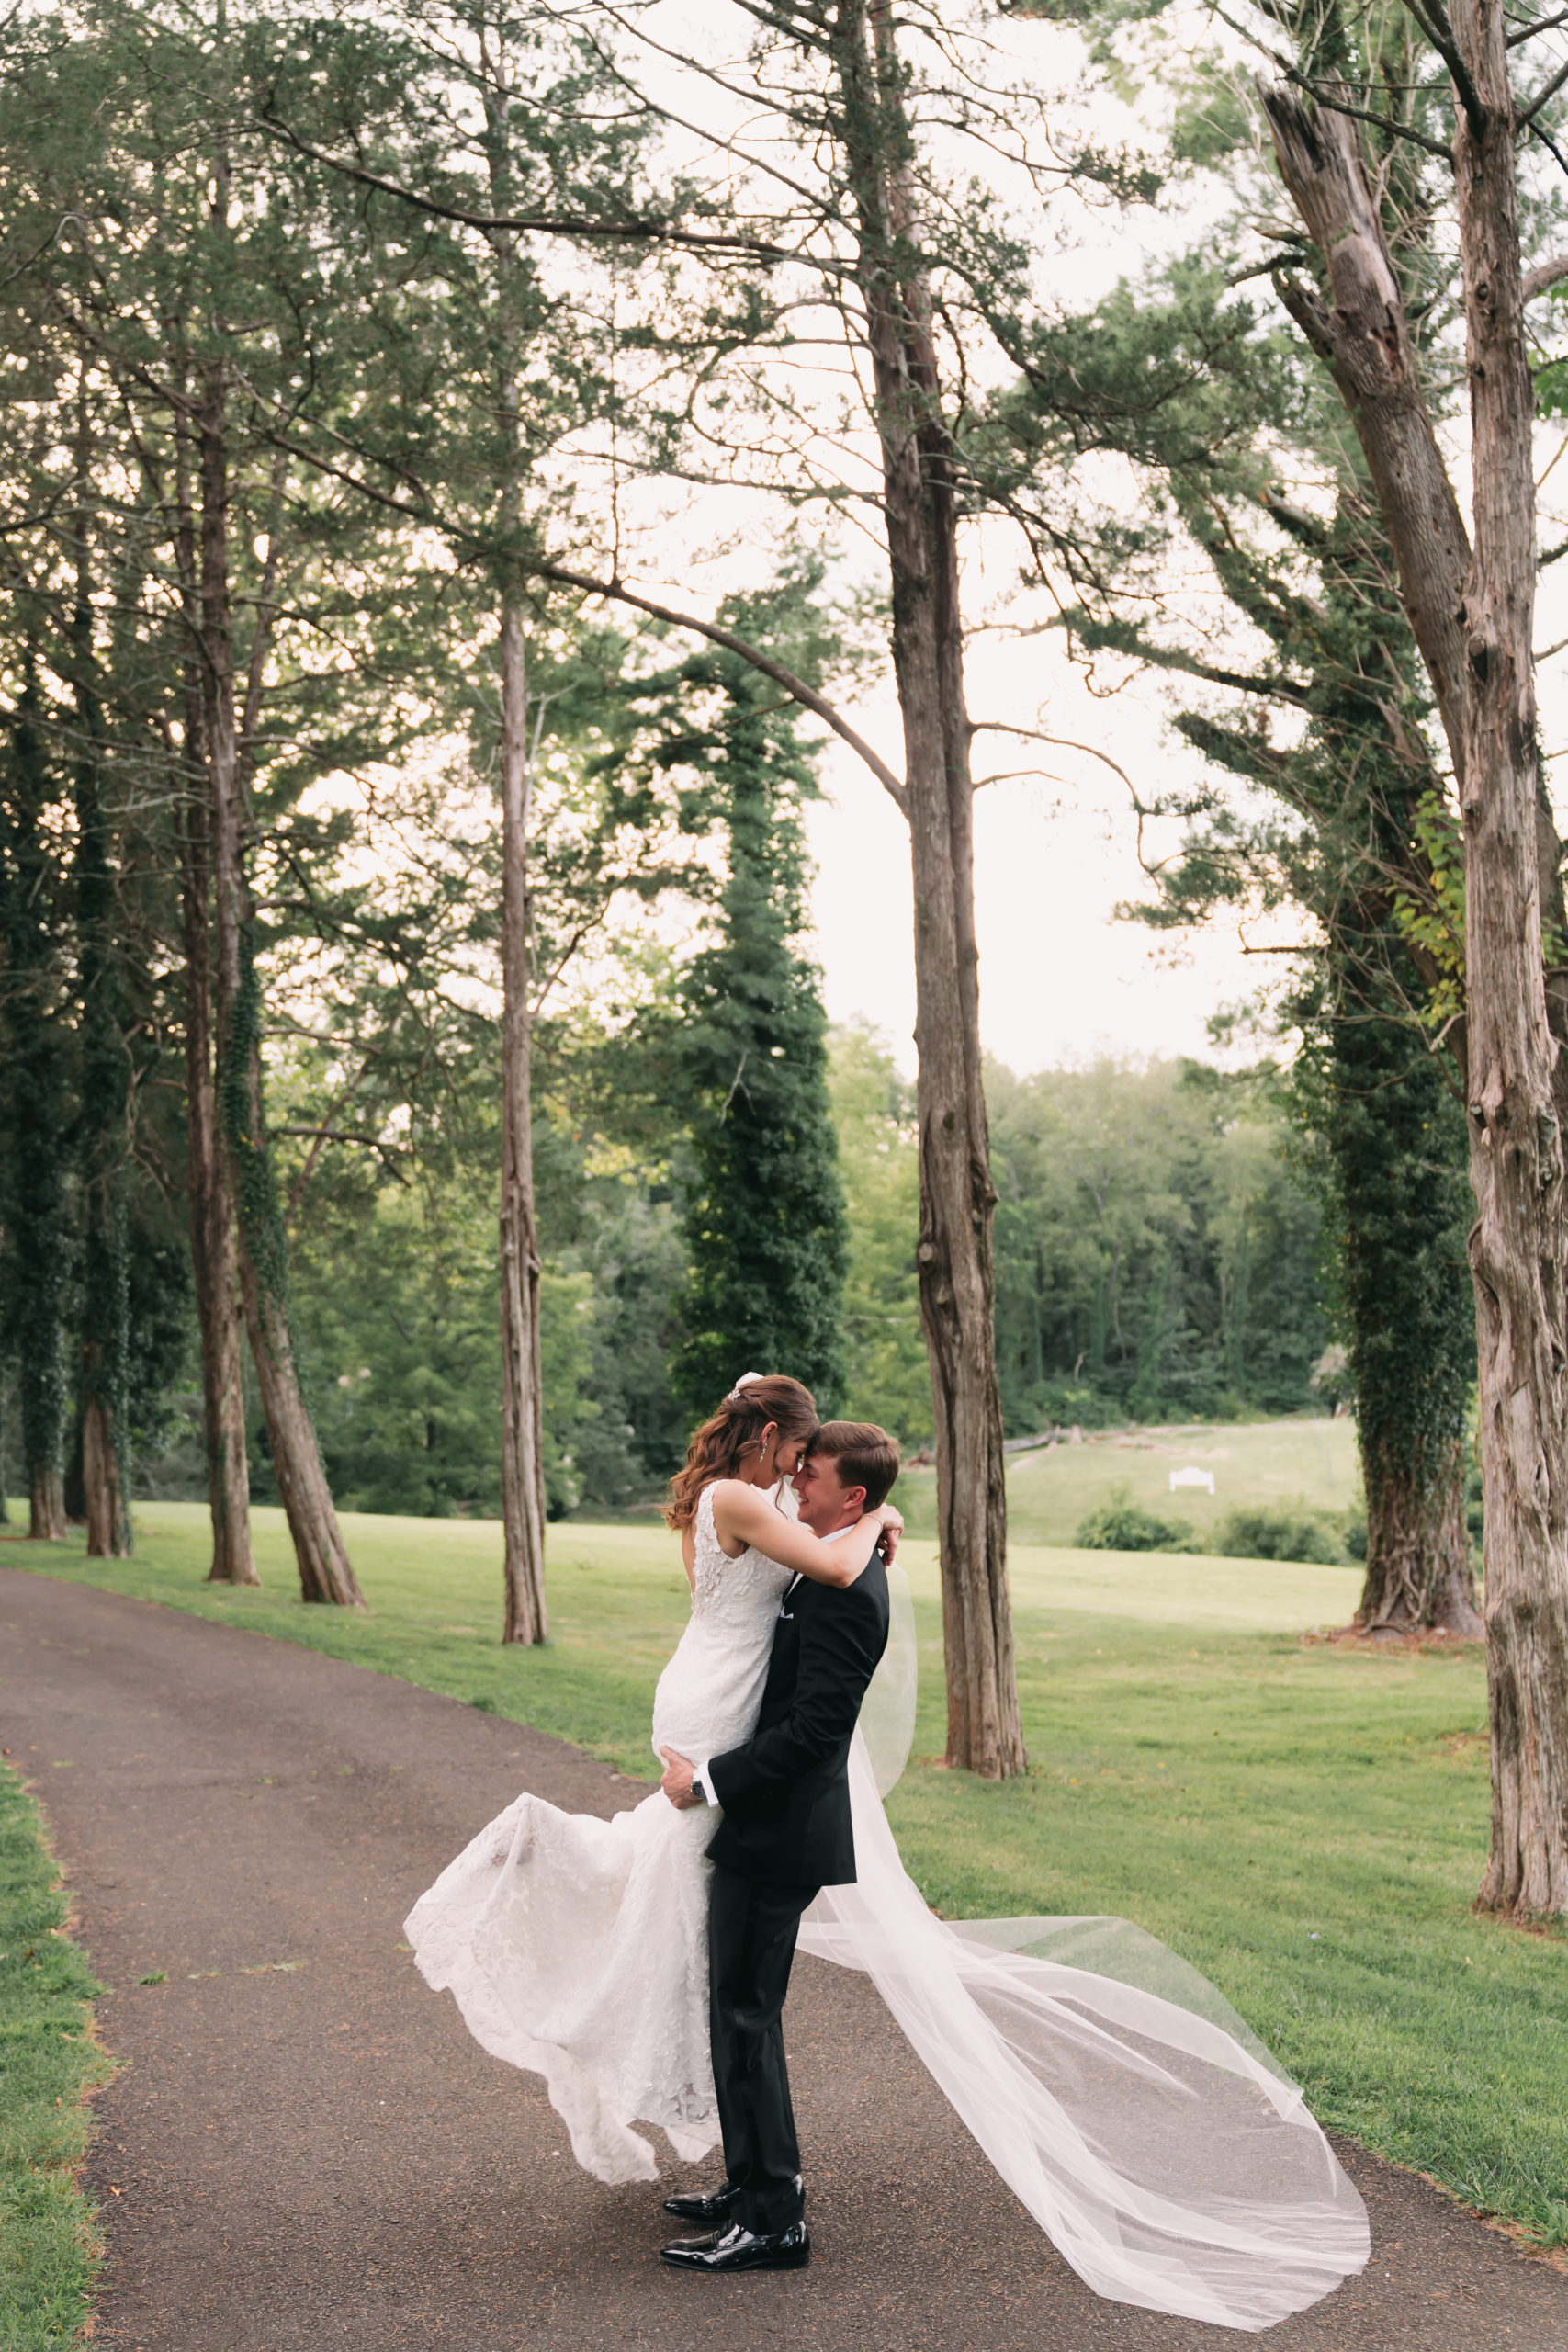 Groom lifts bride up as they share an embrace, taken by Rachel Yearick Photography